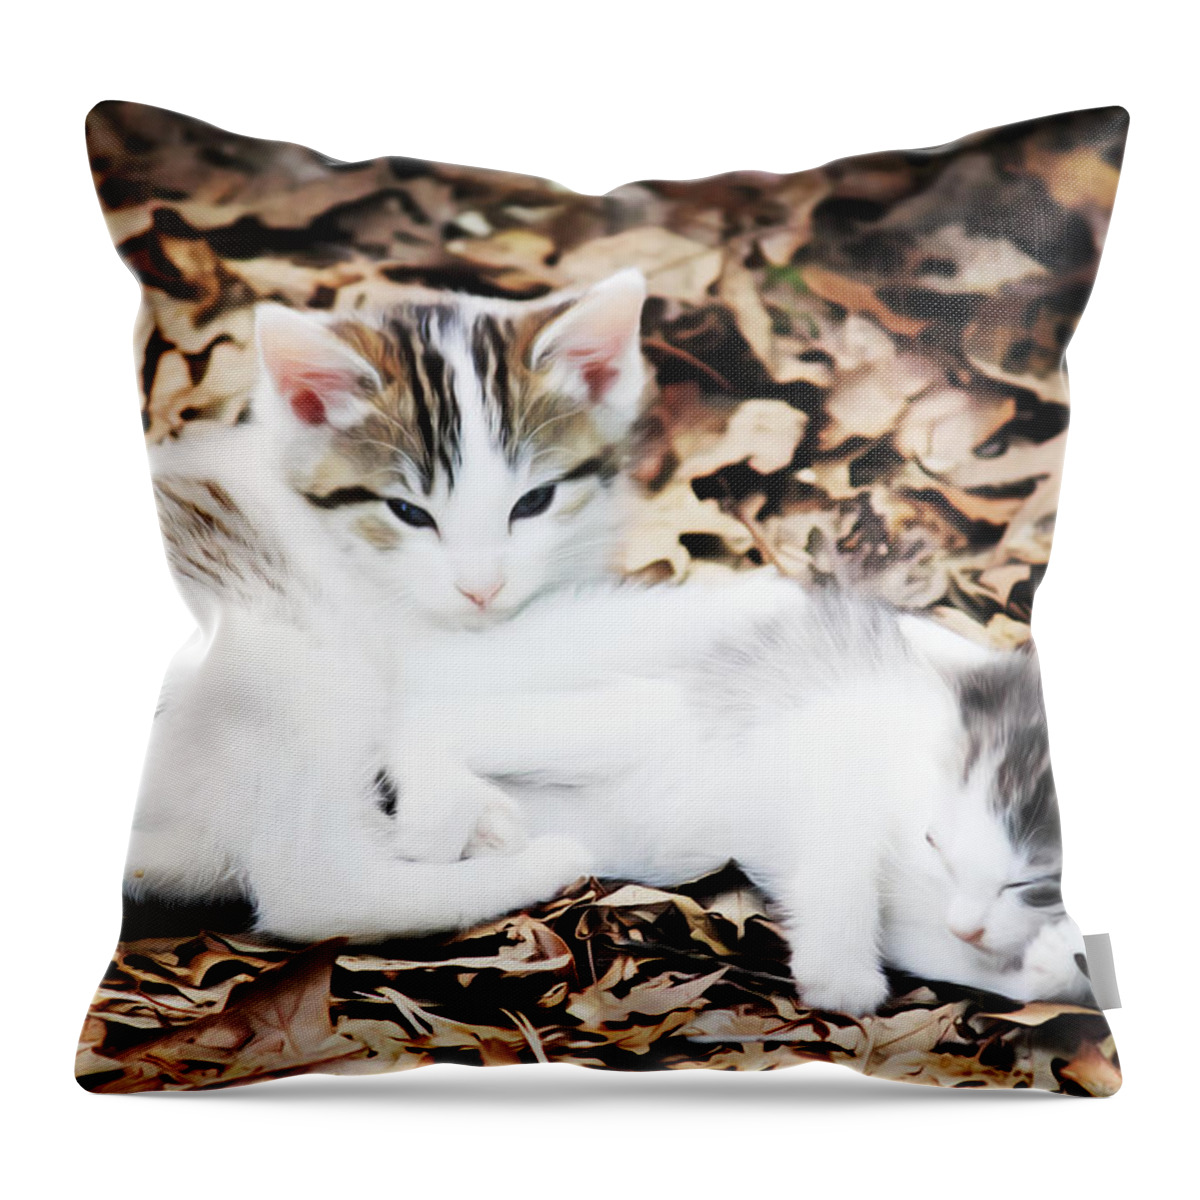 Cats Throw Pillow featuring the photograph We're Bored by David Smith